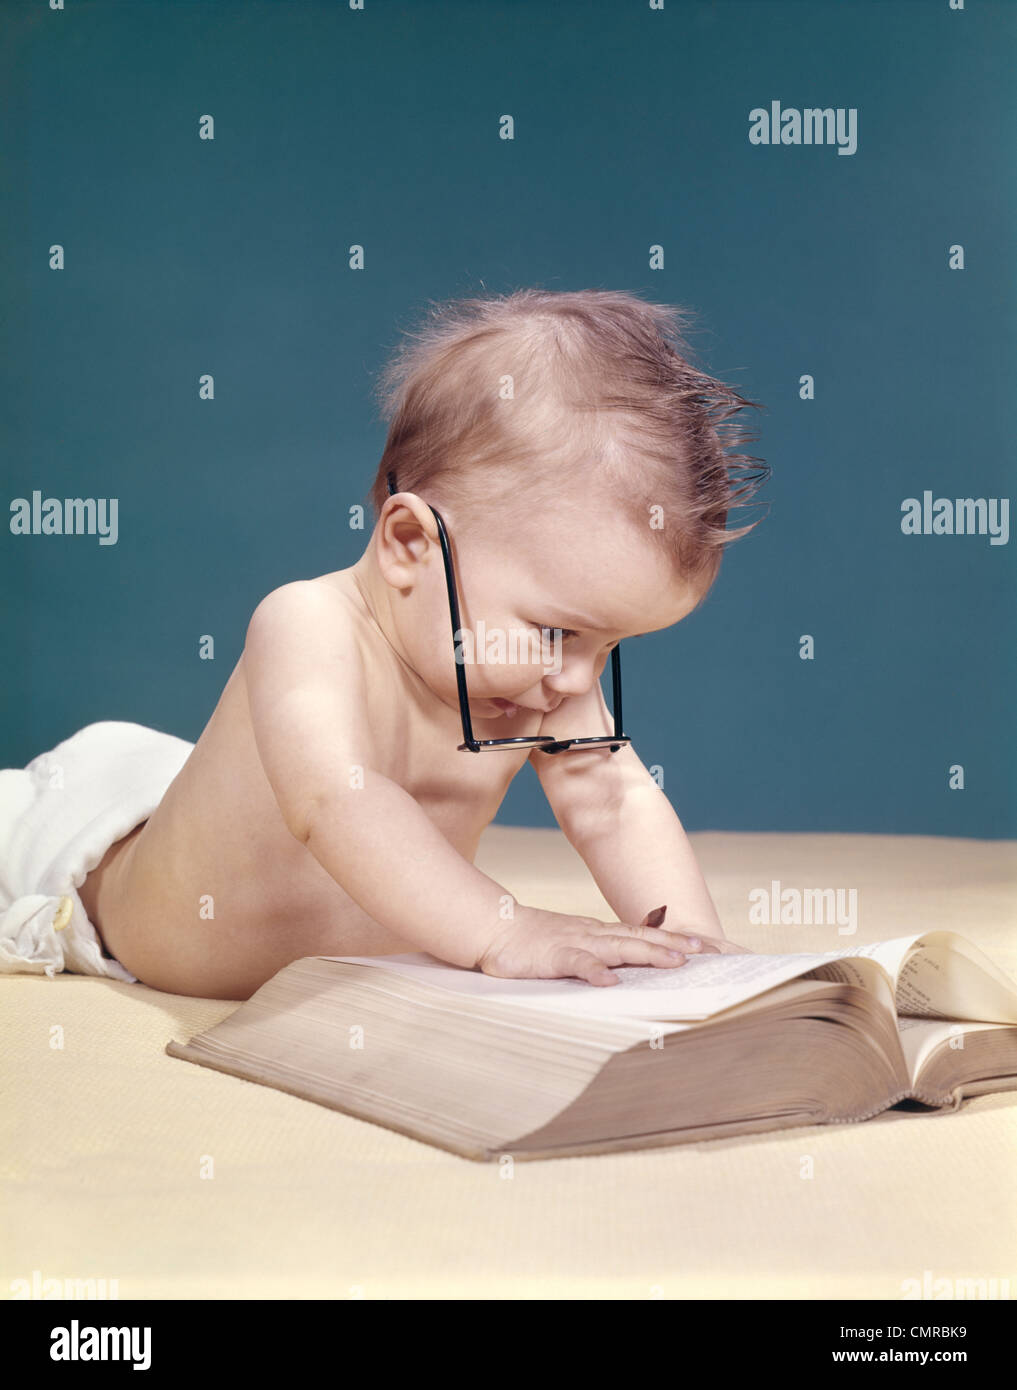 1960s FUNNY BABY WEARING OVERSIZED GLASSES READING BIG BOOK Stock Photo